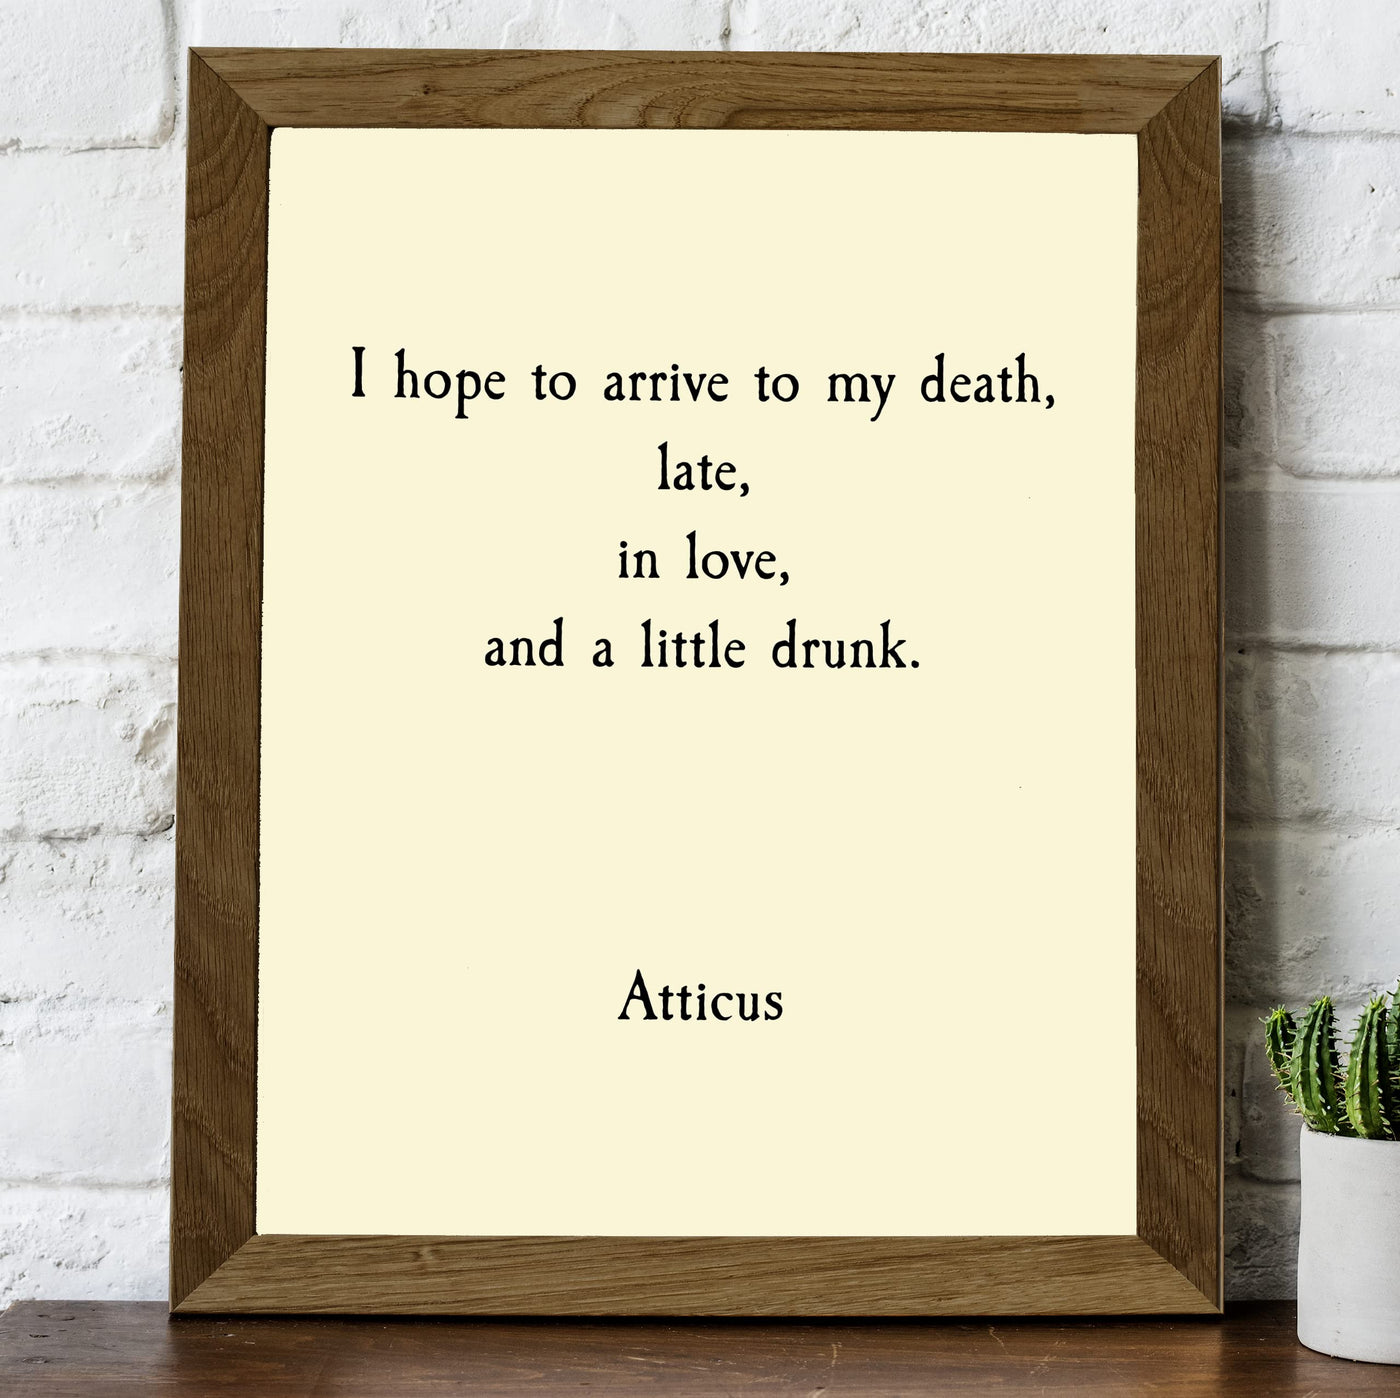 Atticus Quotes-"Hope to Arrive to My Death Late, In Love, & A Little Drunk"- Funny Wall Art Sign - 8 x 10" Poetic Poster Print -Ready To Frame. Perfect Home-Office-Study-Cave Decor. Great Gift!